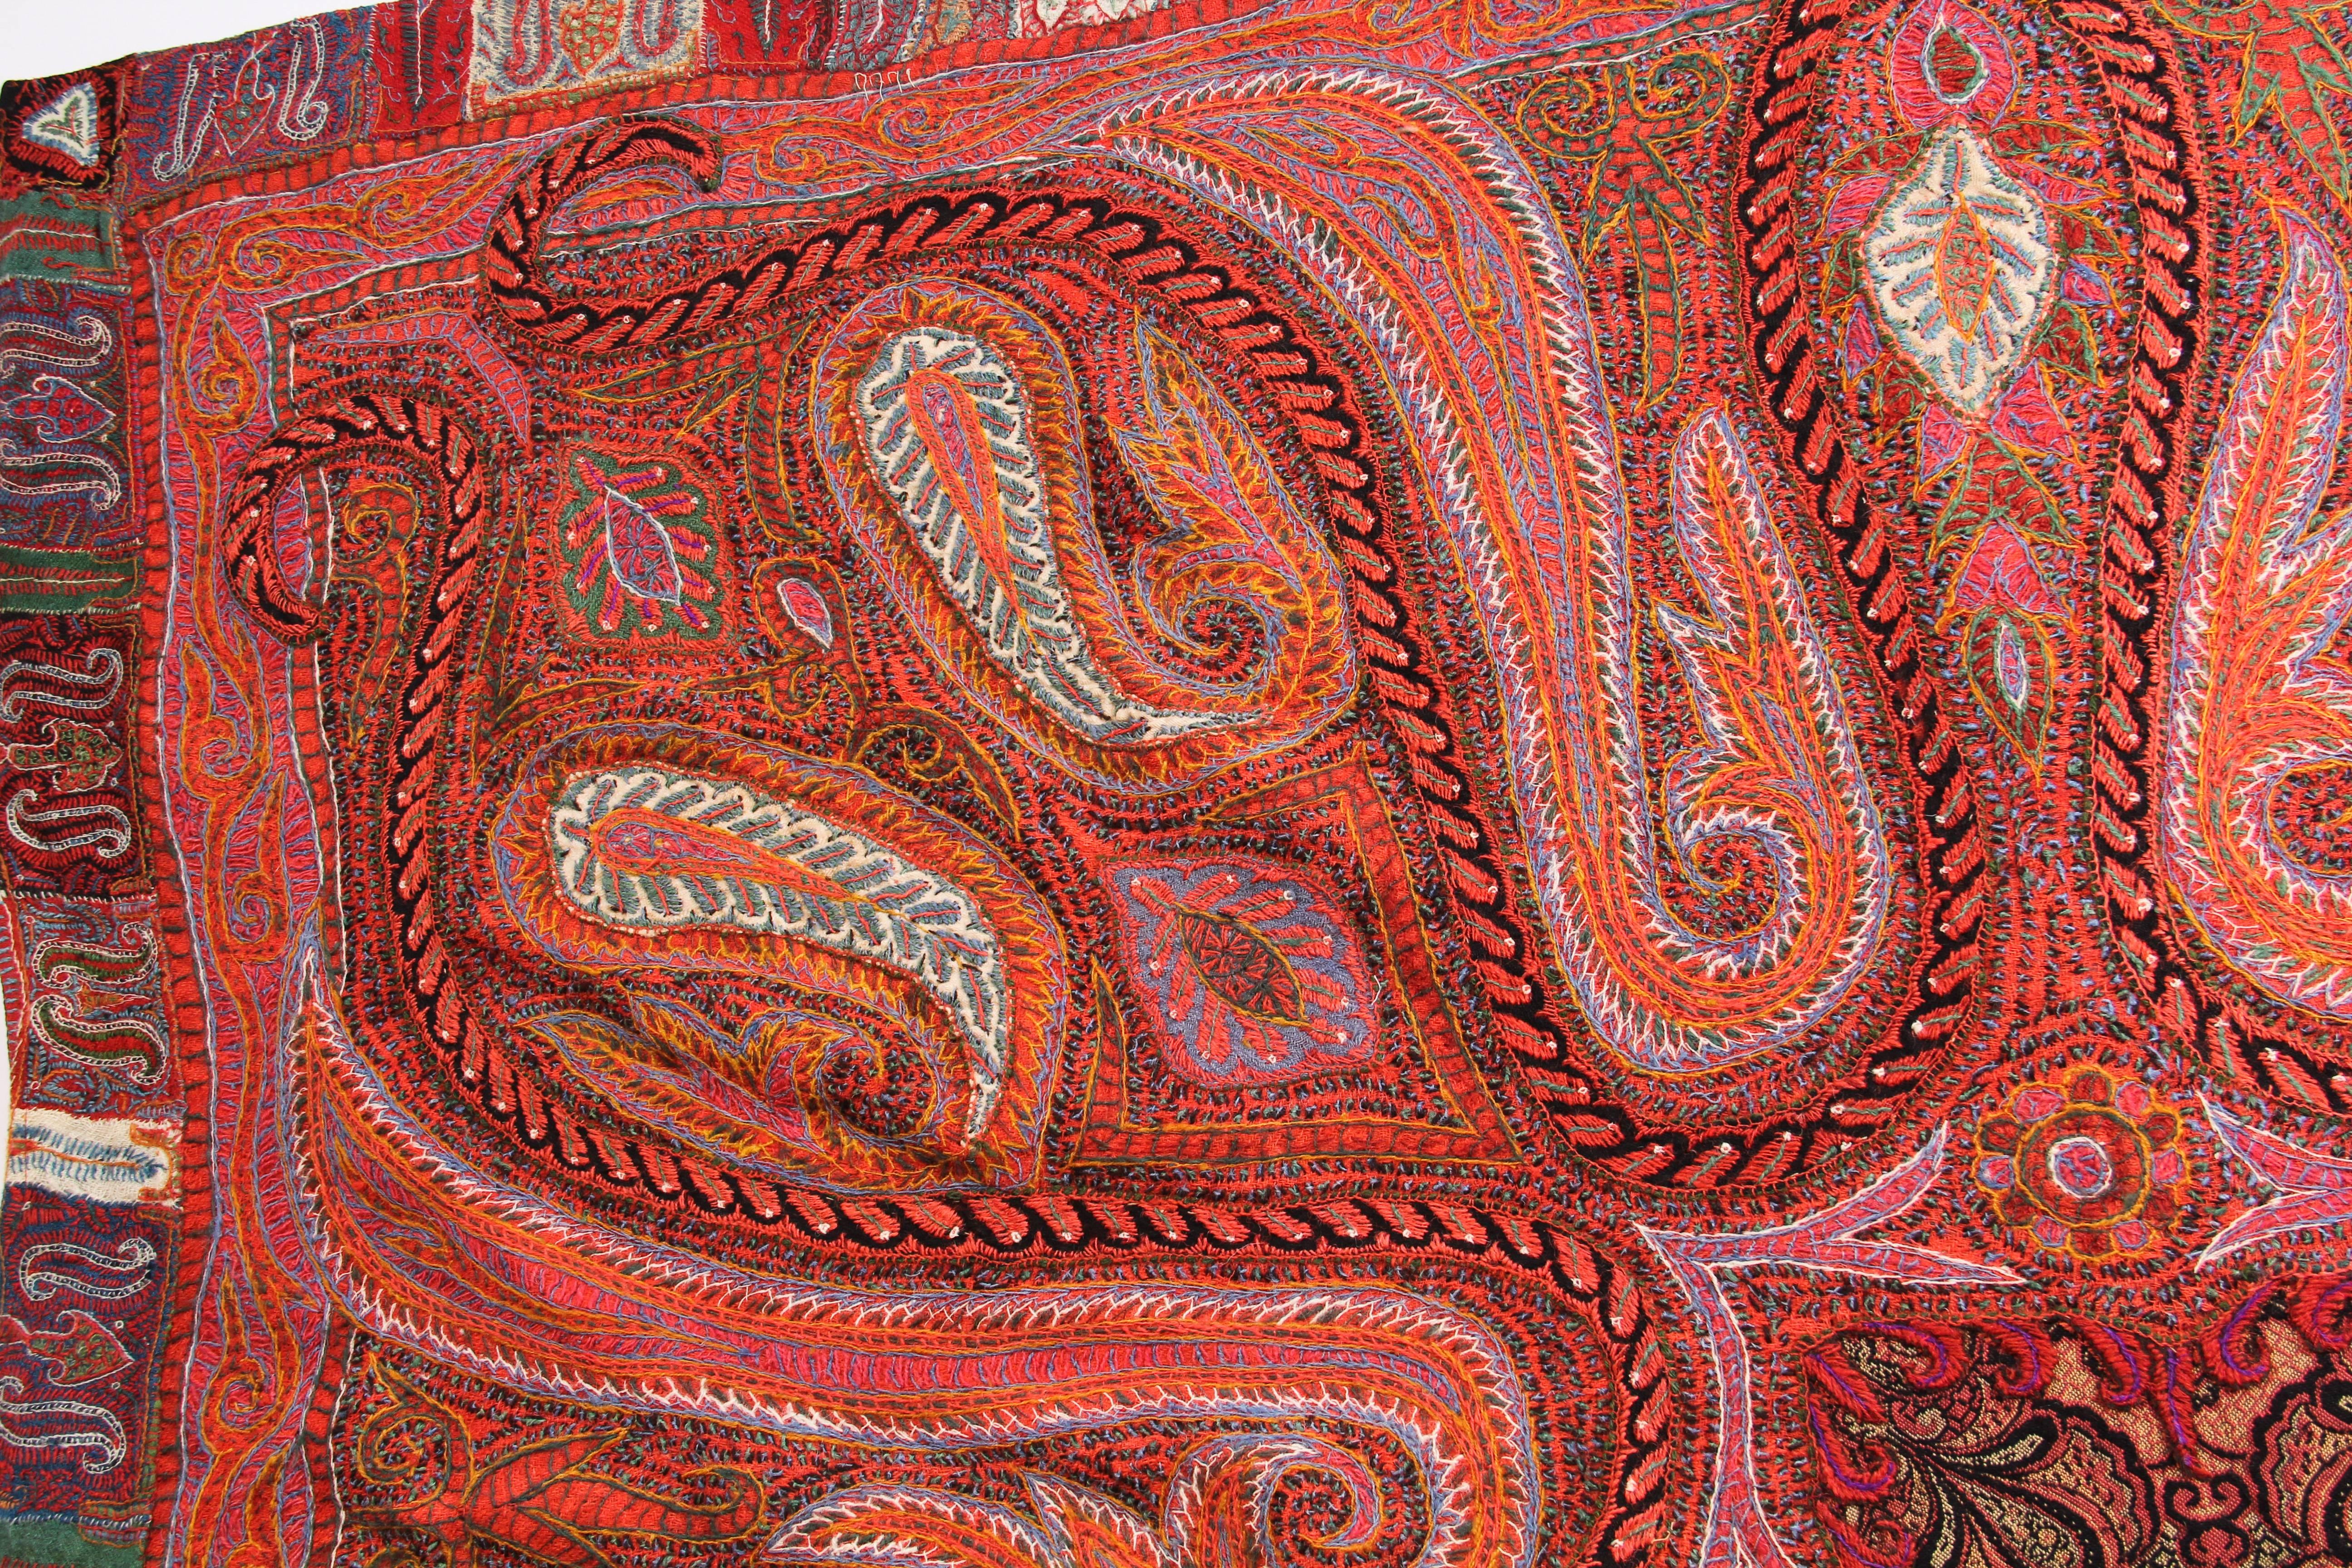 Women's or Men's Antique Indian Embroidered Paisley Shawl blanket